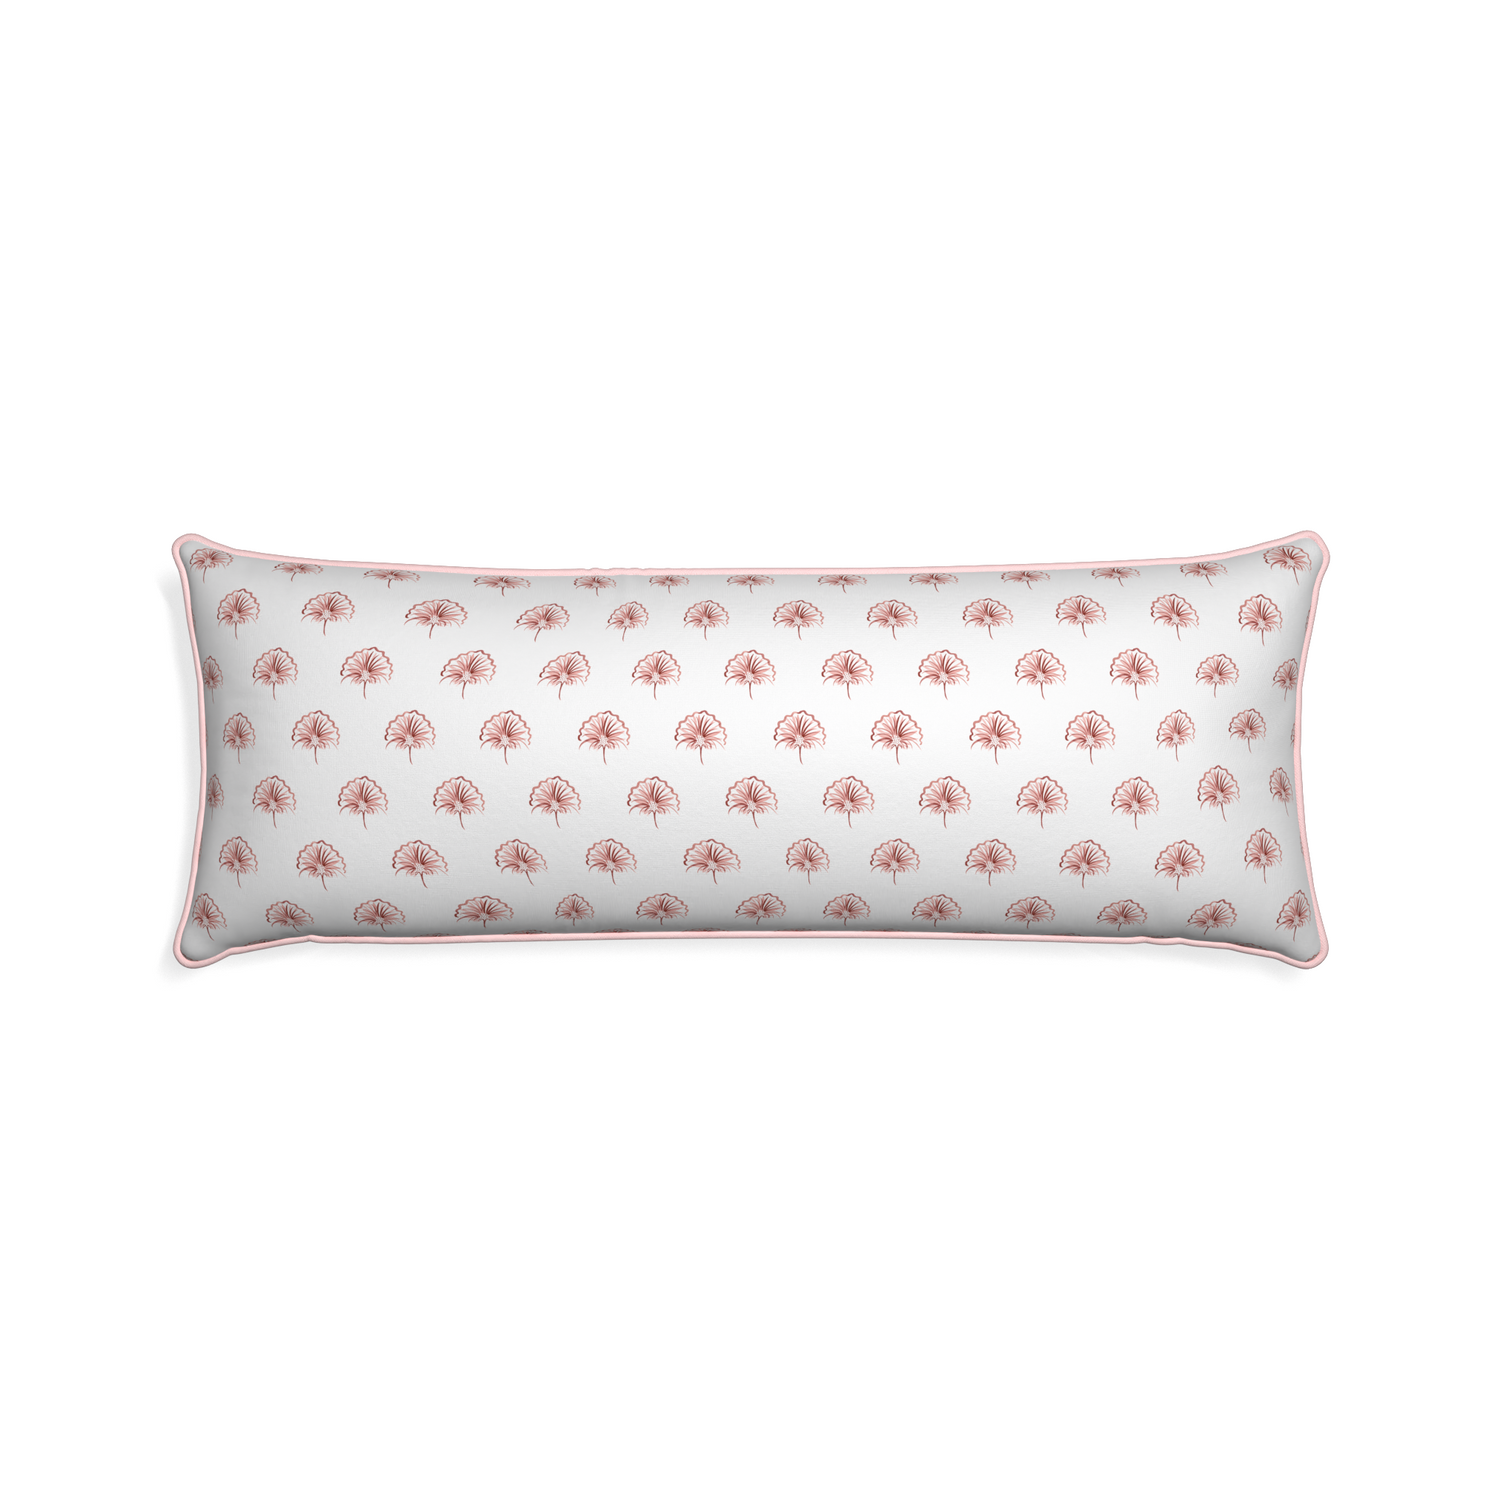 Xl-lumbar penelope rose custom floral pinkpillow with petal piping on white background